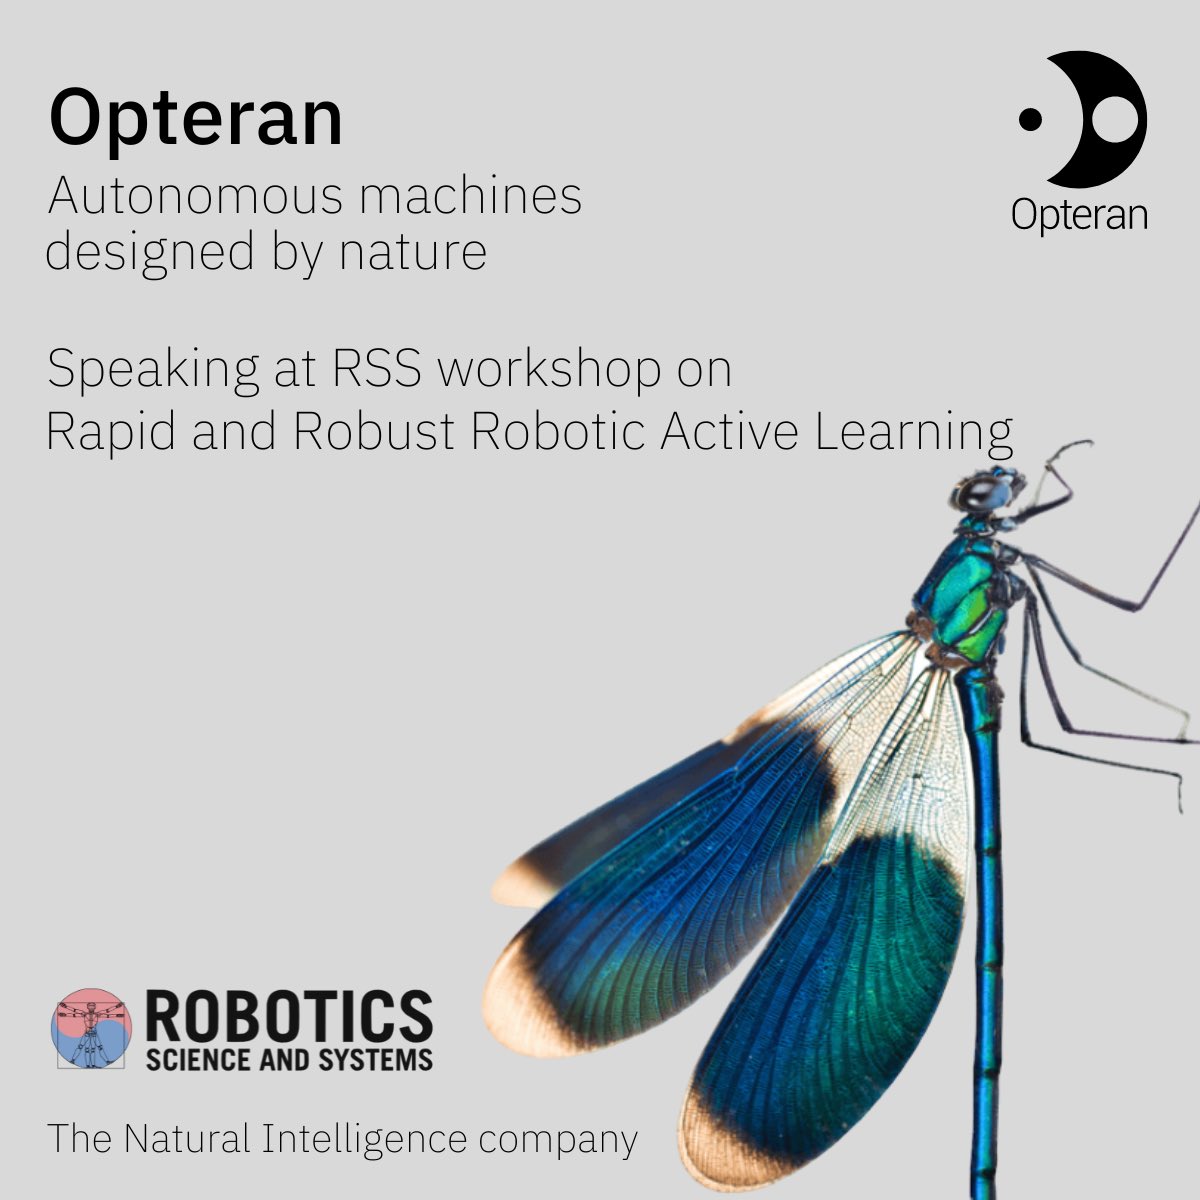 Join Opteran's Research Director, Dr Mike Mangan, at RSS workshop Rapid and Robust Active Learning, where he will describe how reverse-engineering brains is solving real world autonomy problems. #robotics #AI #research #naturalintelligence #machineautonomy #autonomoussystems